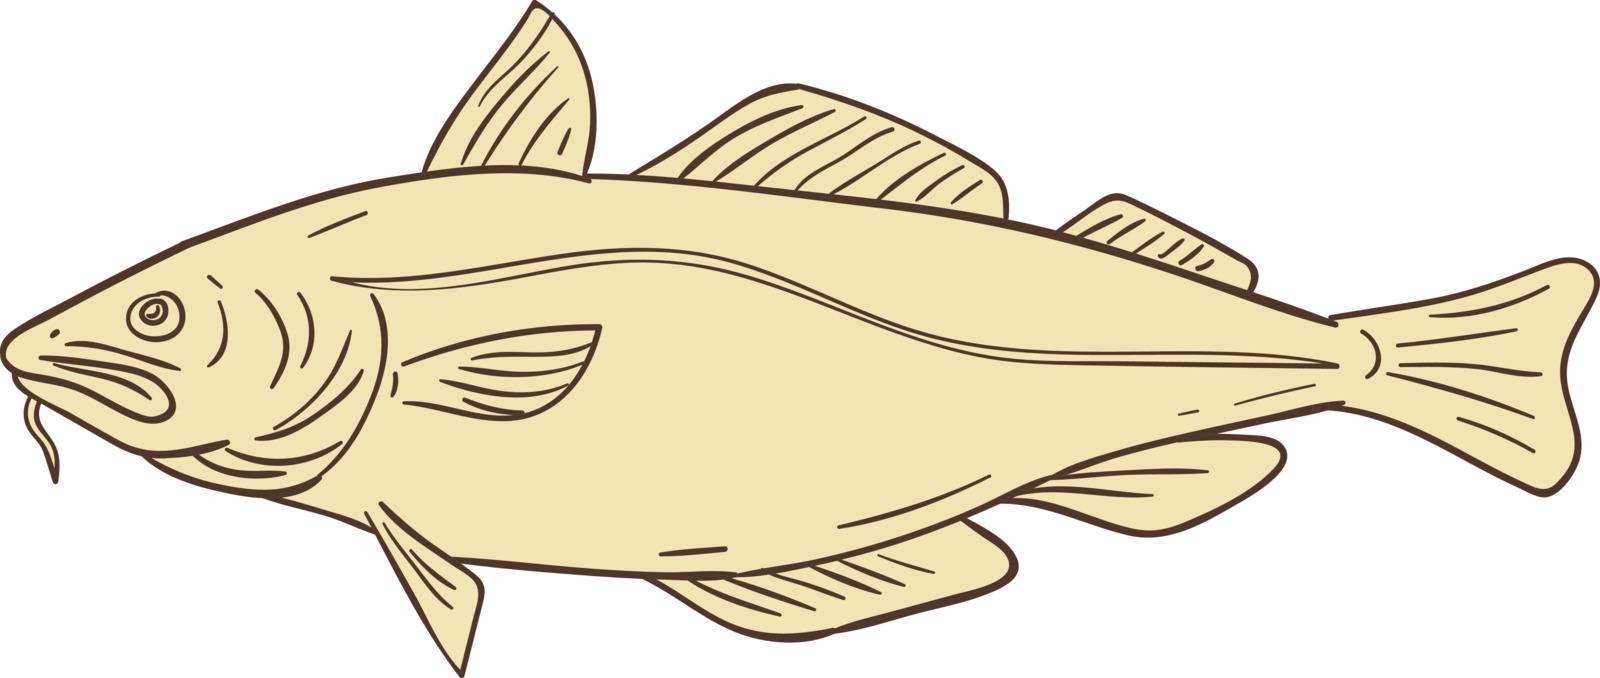 Drawing sketch style illustration of an Atlantic cod, or Gadus morhua, a benthopelagic fish of the family Gadidae, also commercially known as cod or codling viewed from the side set on isolated white background. 